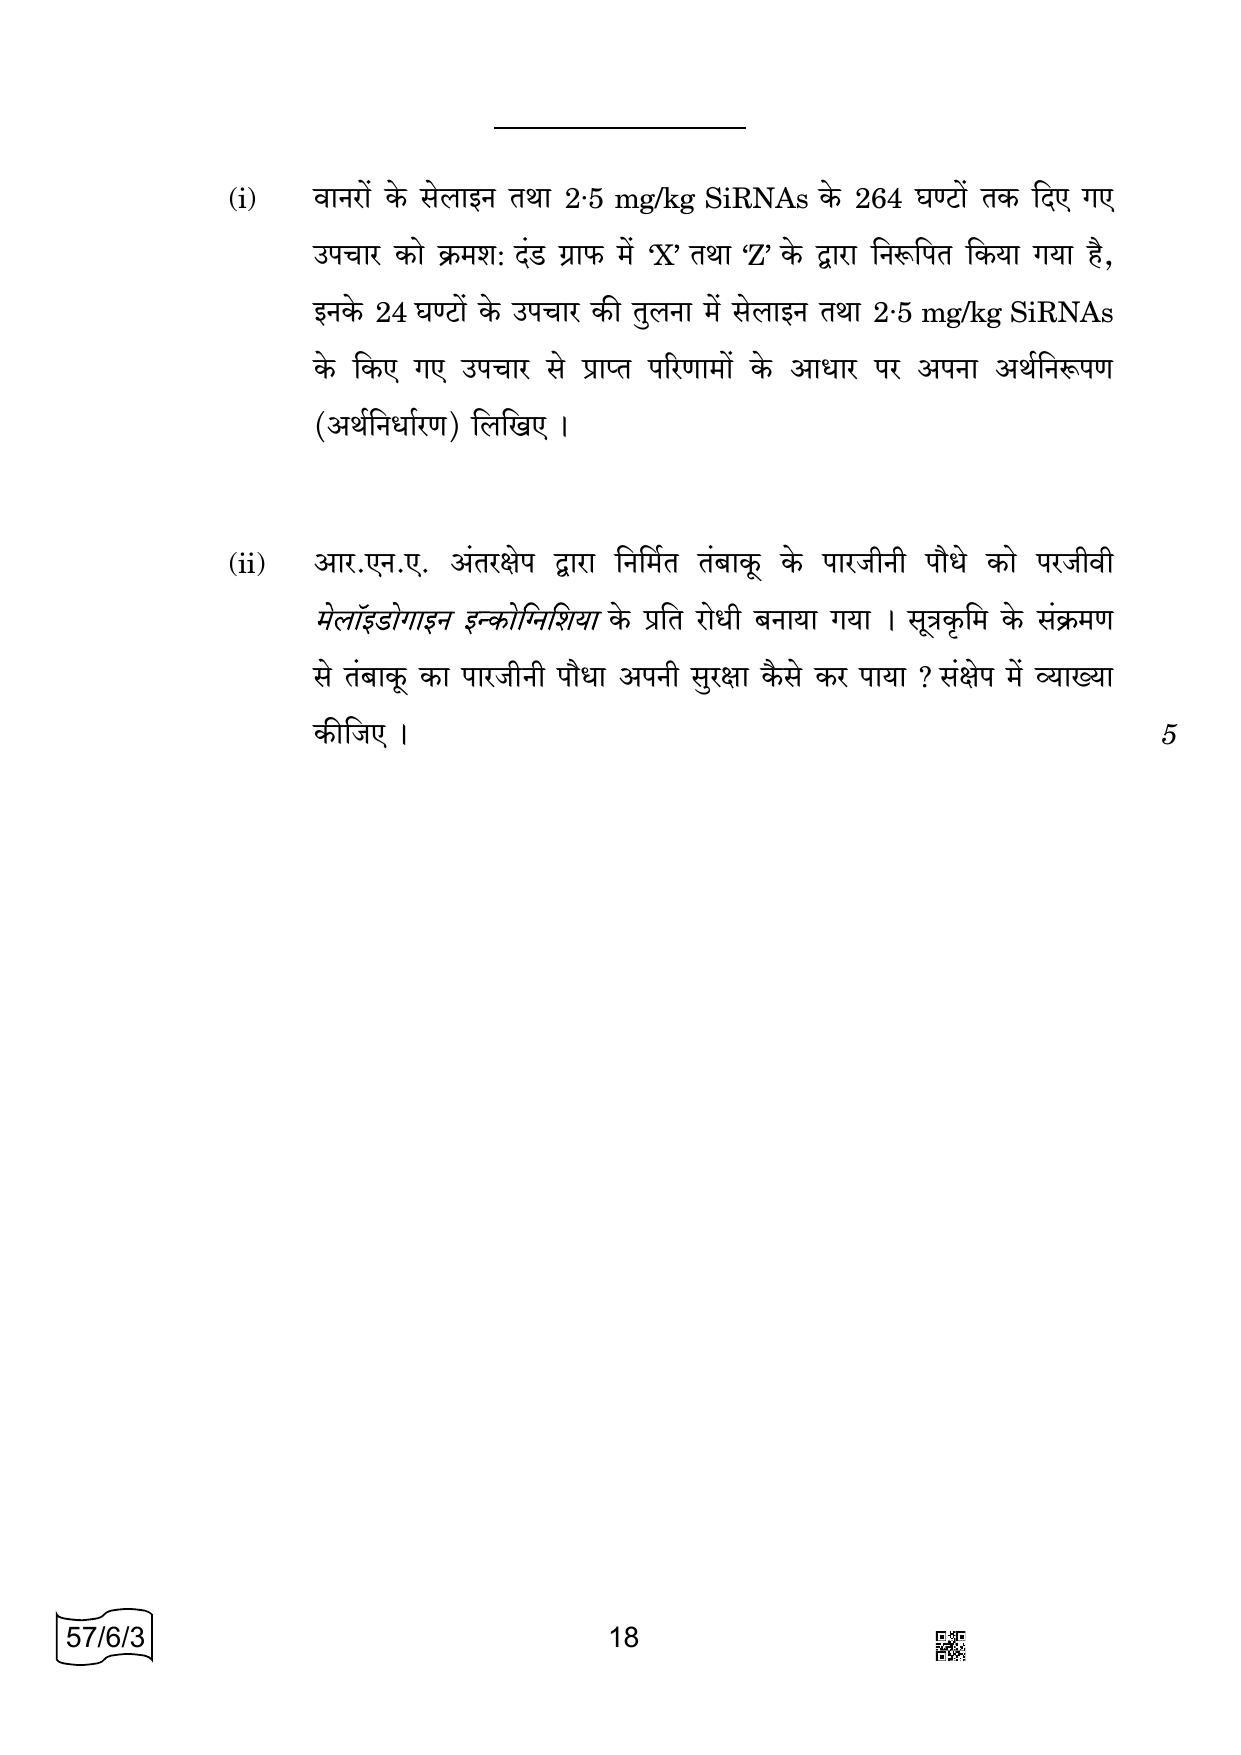 CBSE Class 12 57-6-3 BIOLOGY 2022 Compartment Question Paper - Page 18